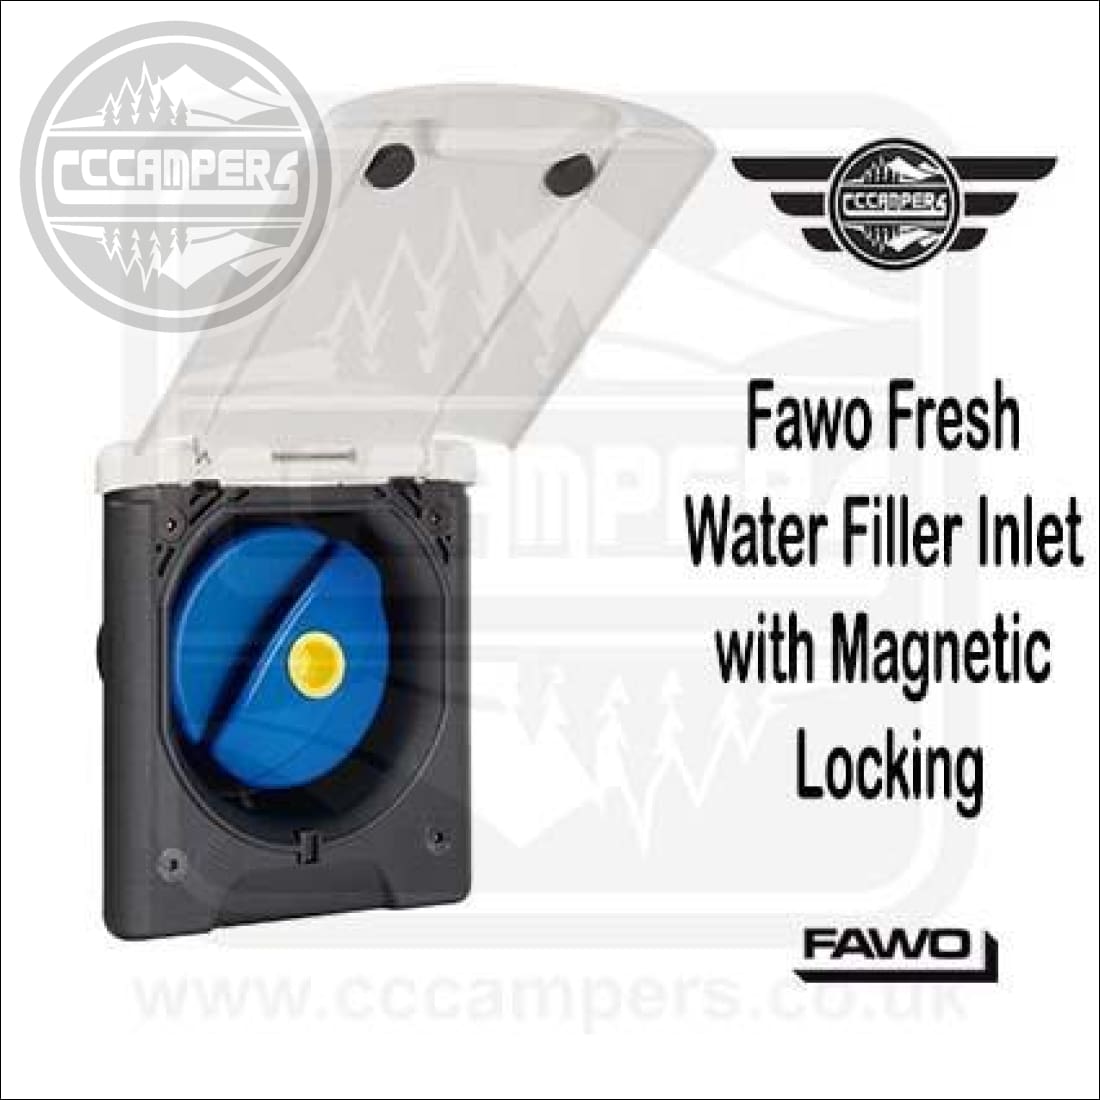 Fawo Fresh Water Filler Inlet Filler with Magnetic Closing and filler Cap Black - cccampers.myshopify.com